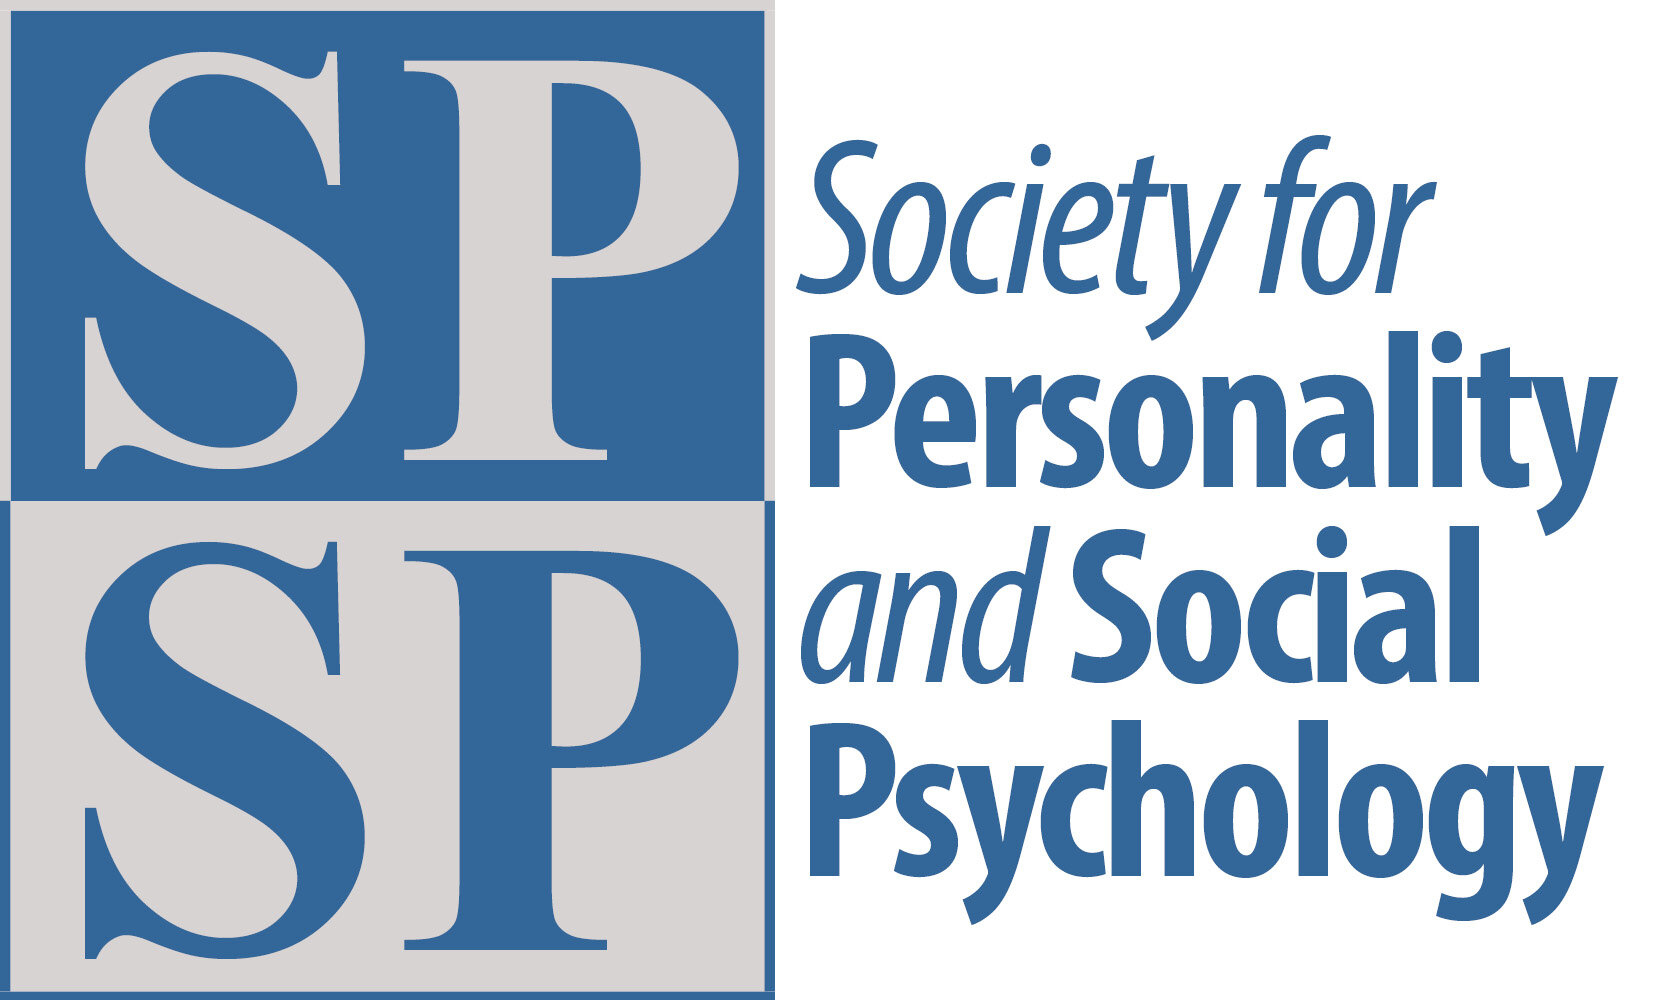 Graphic promoting the Society for Personality and Social Psychology